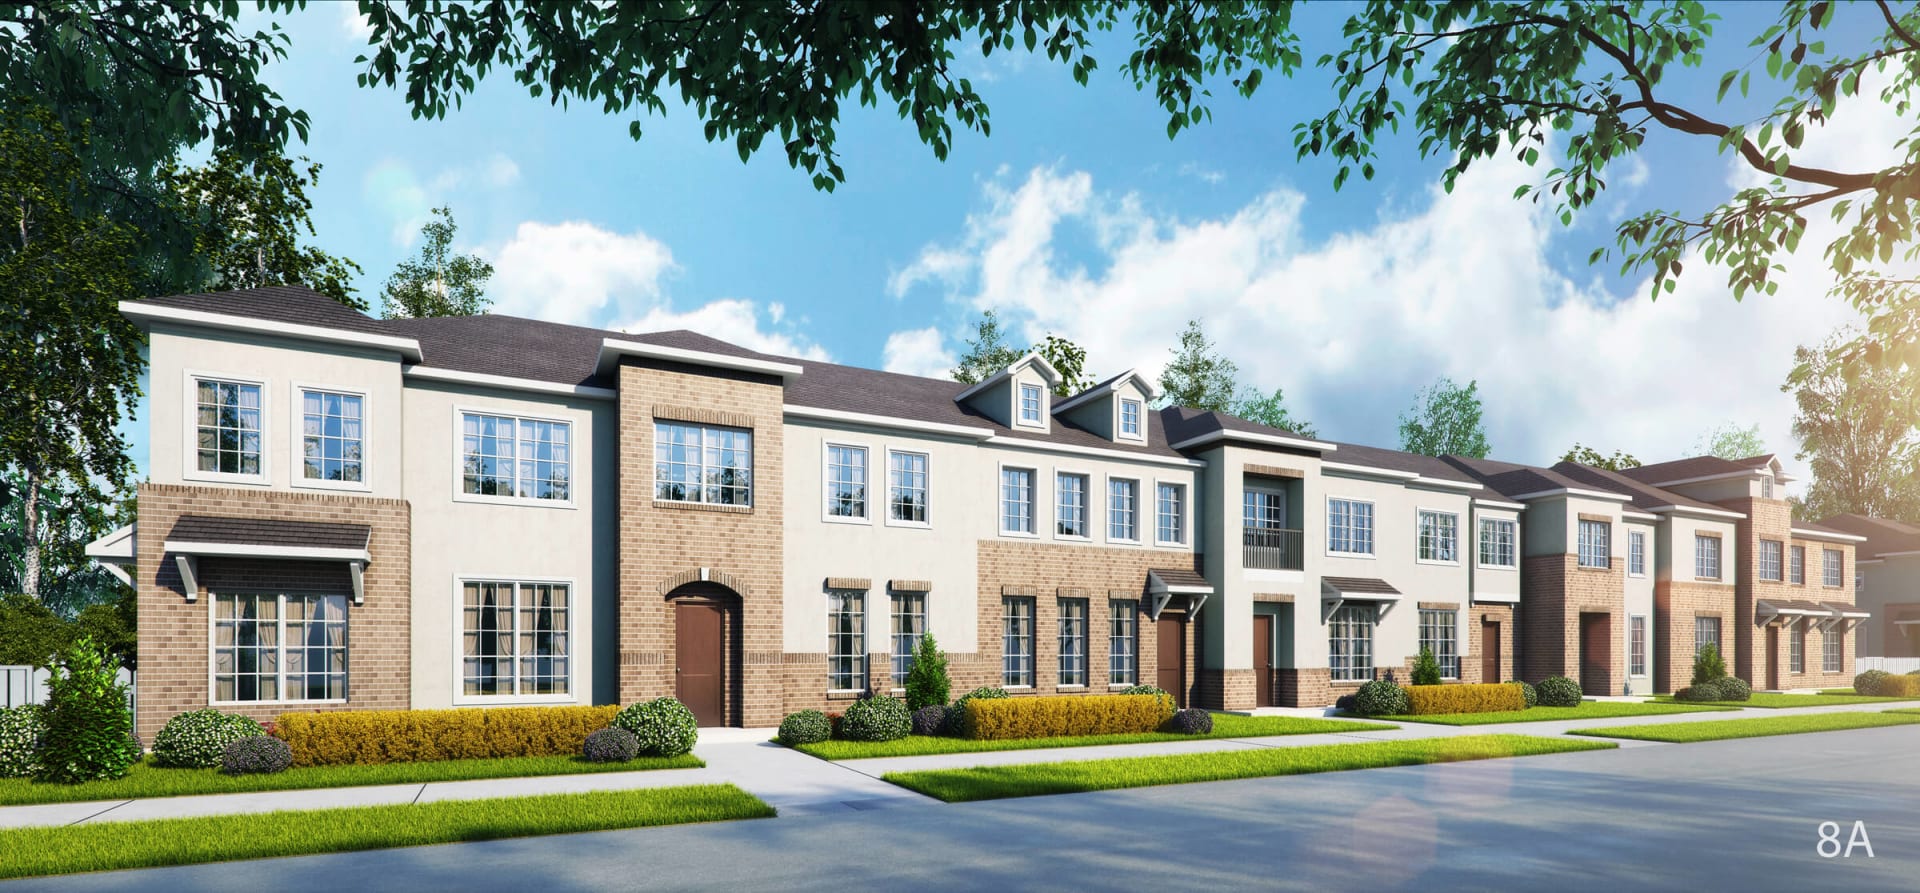 Elegant Exterior View Of The Townhomes The Residences at Rayzor Ranch Denton (972)584-0086